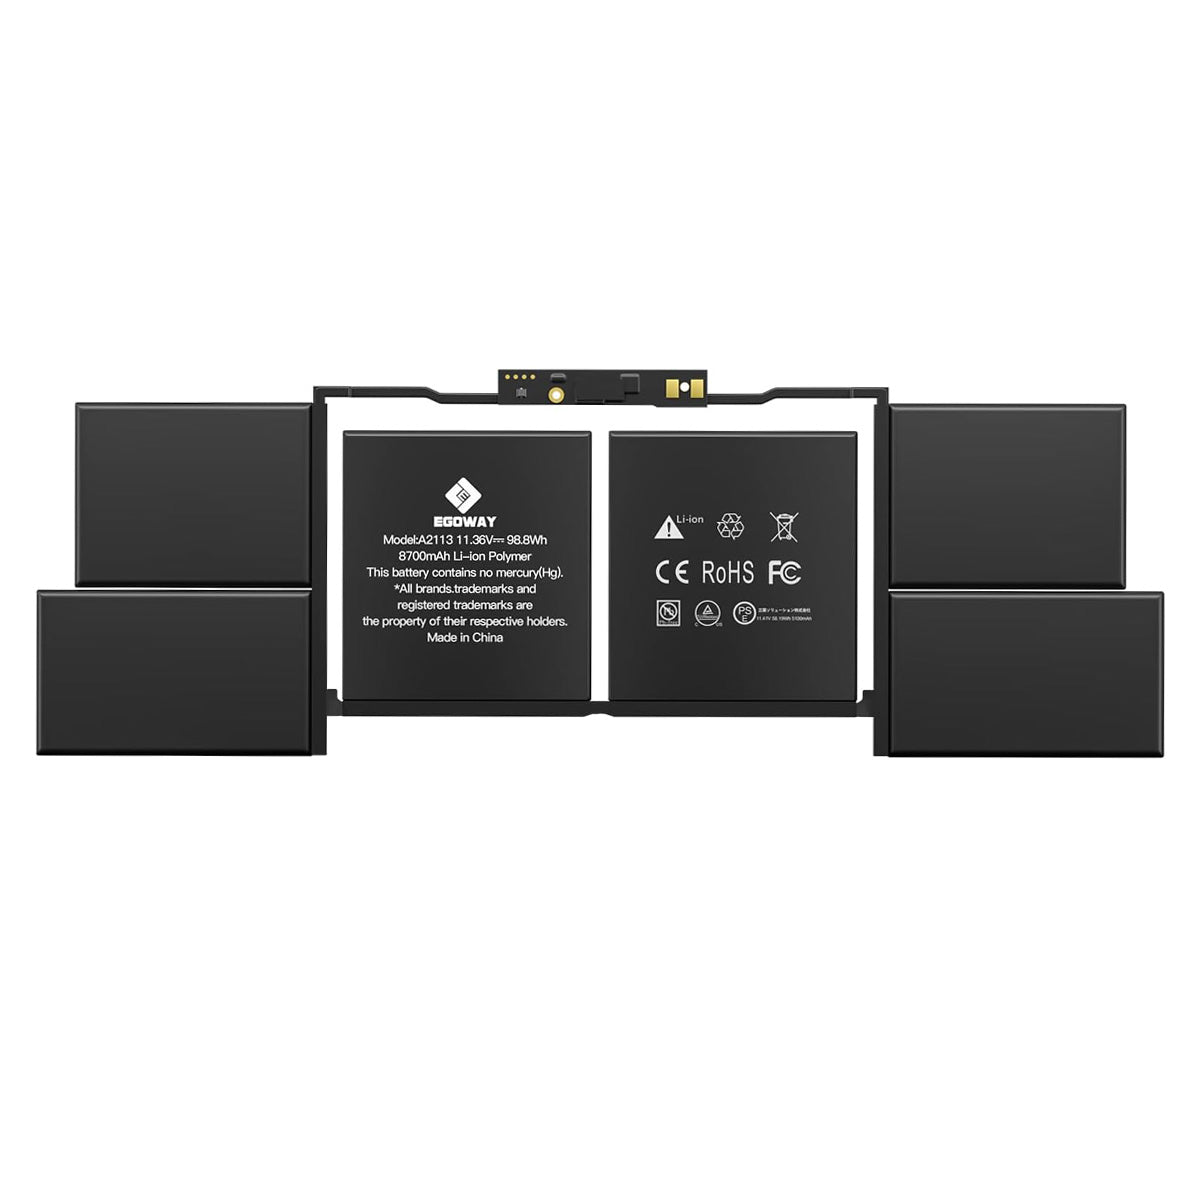 SEVEN PUPPY Brand NEW For Macbook Pro 16" A2113 A2141 2019 2020 Year Laptop Battery